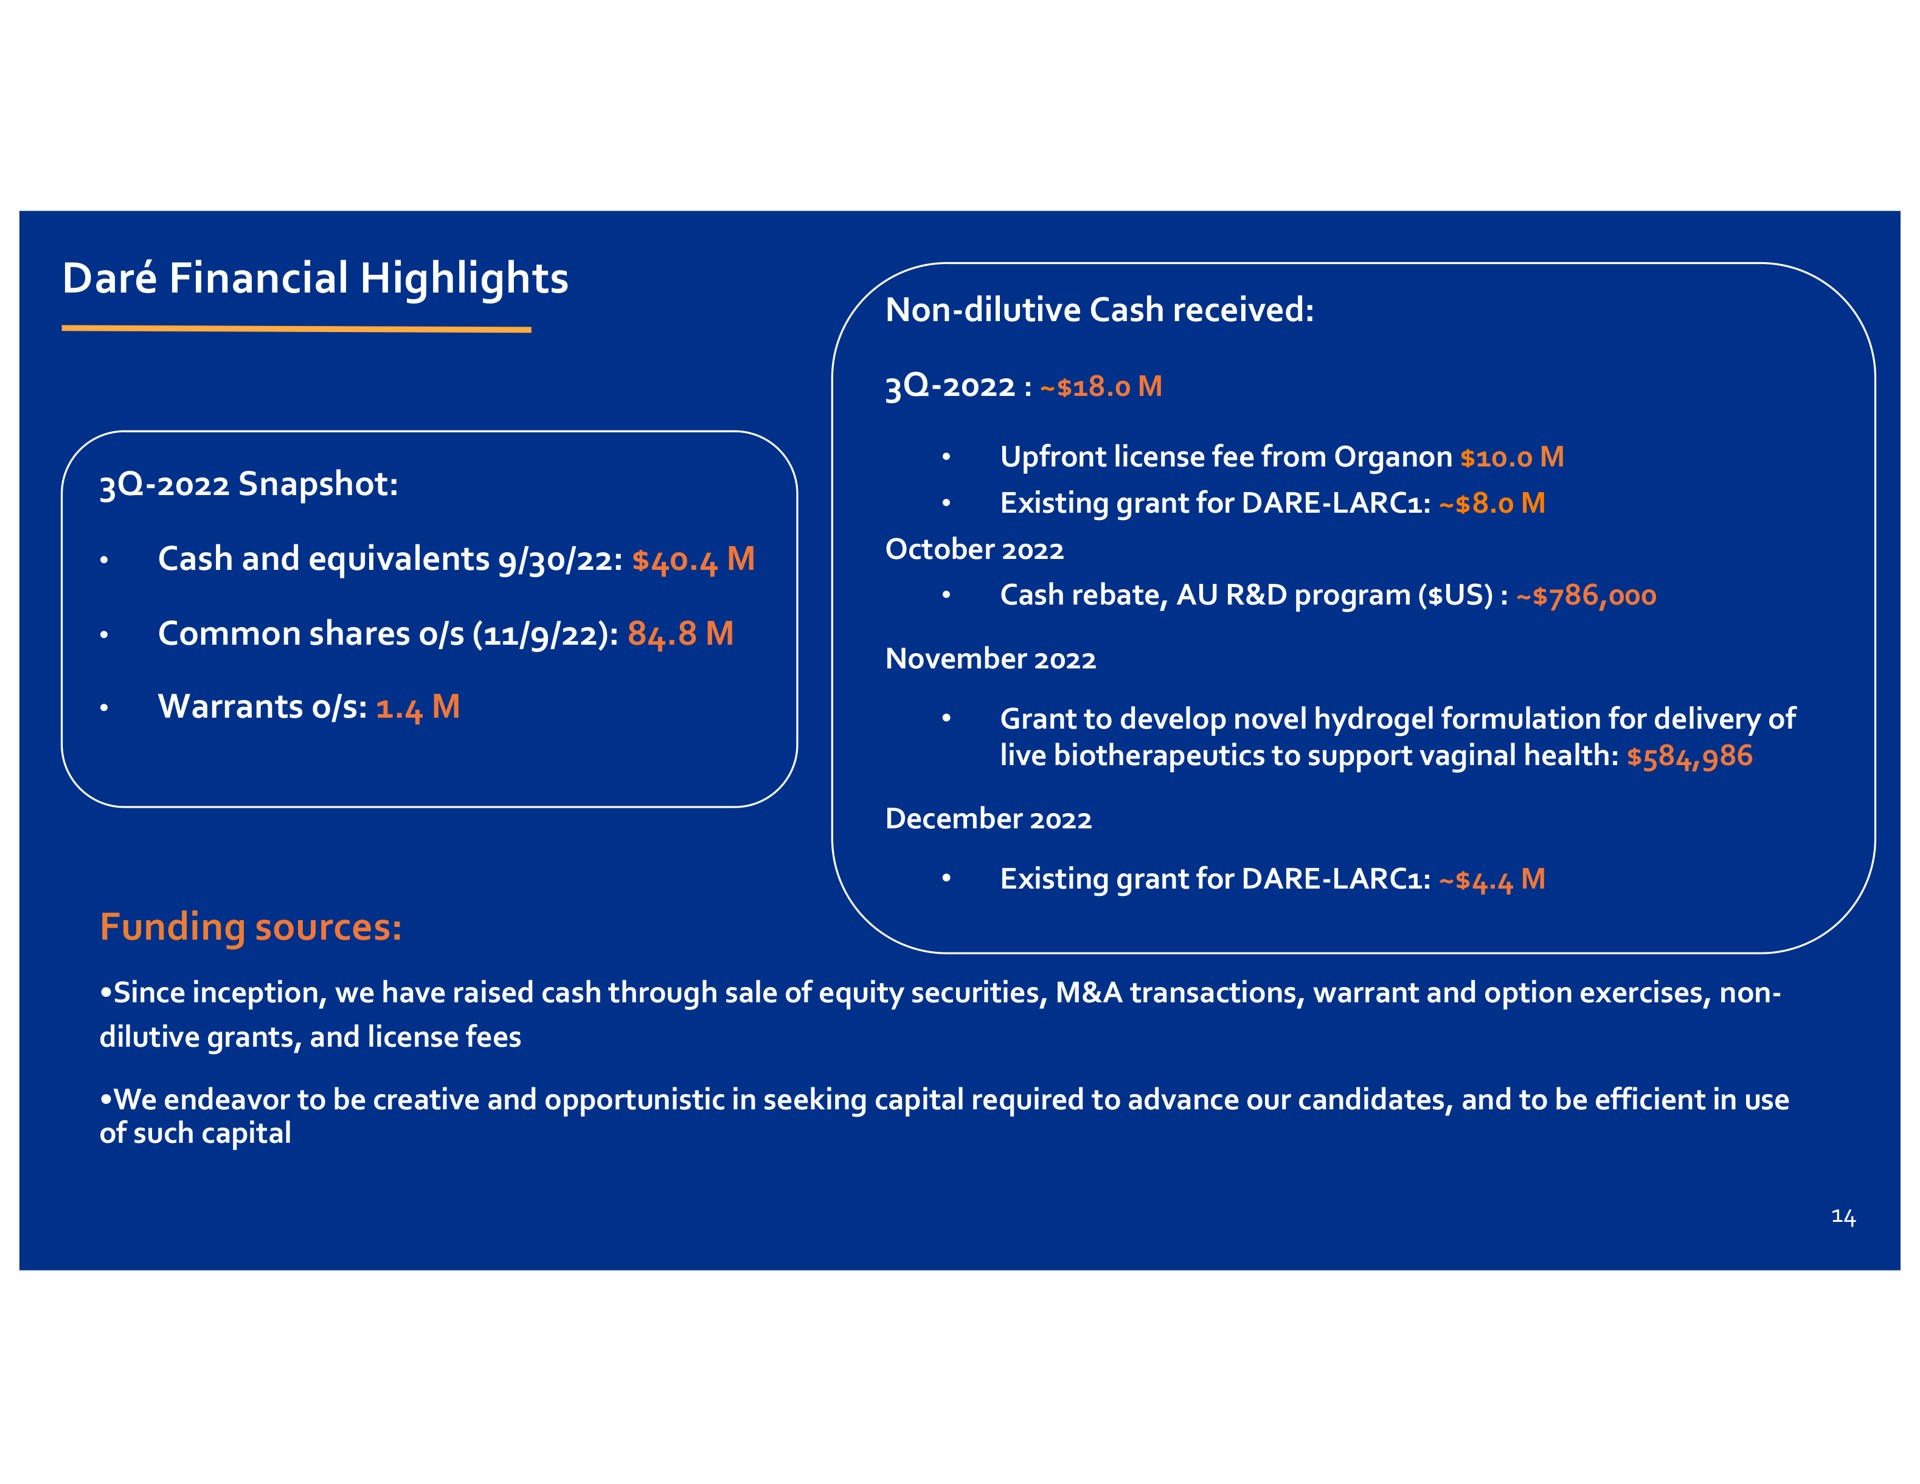 dar financial highlights non dilutive cash received snapshot cash and equivalents common shares warrants funding sources | Dare Bioscience